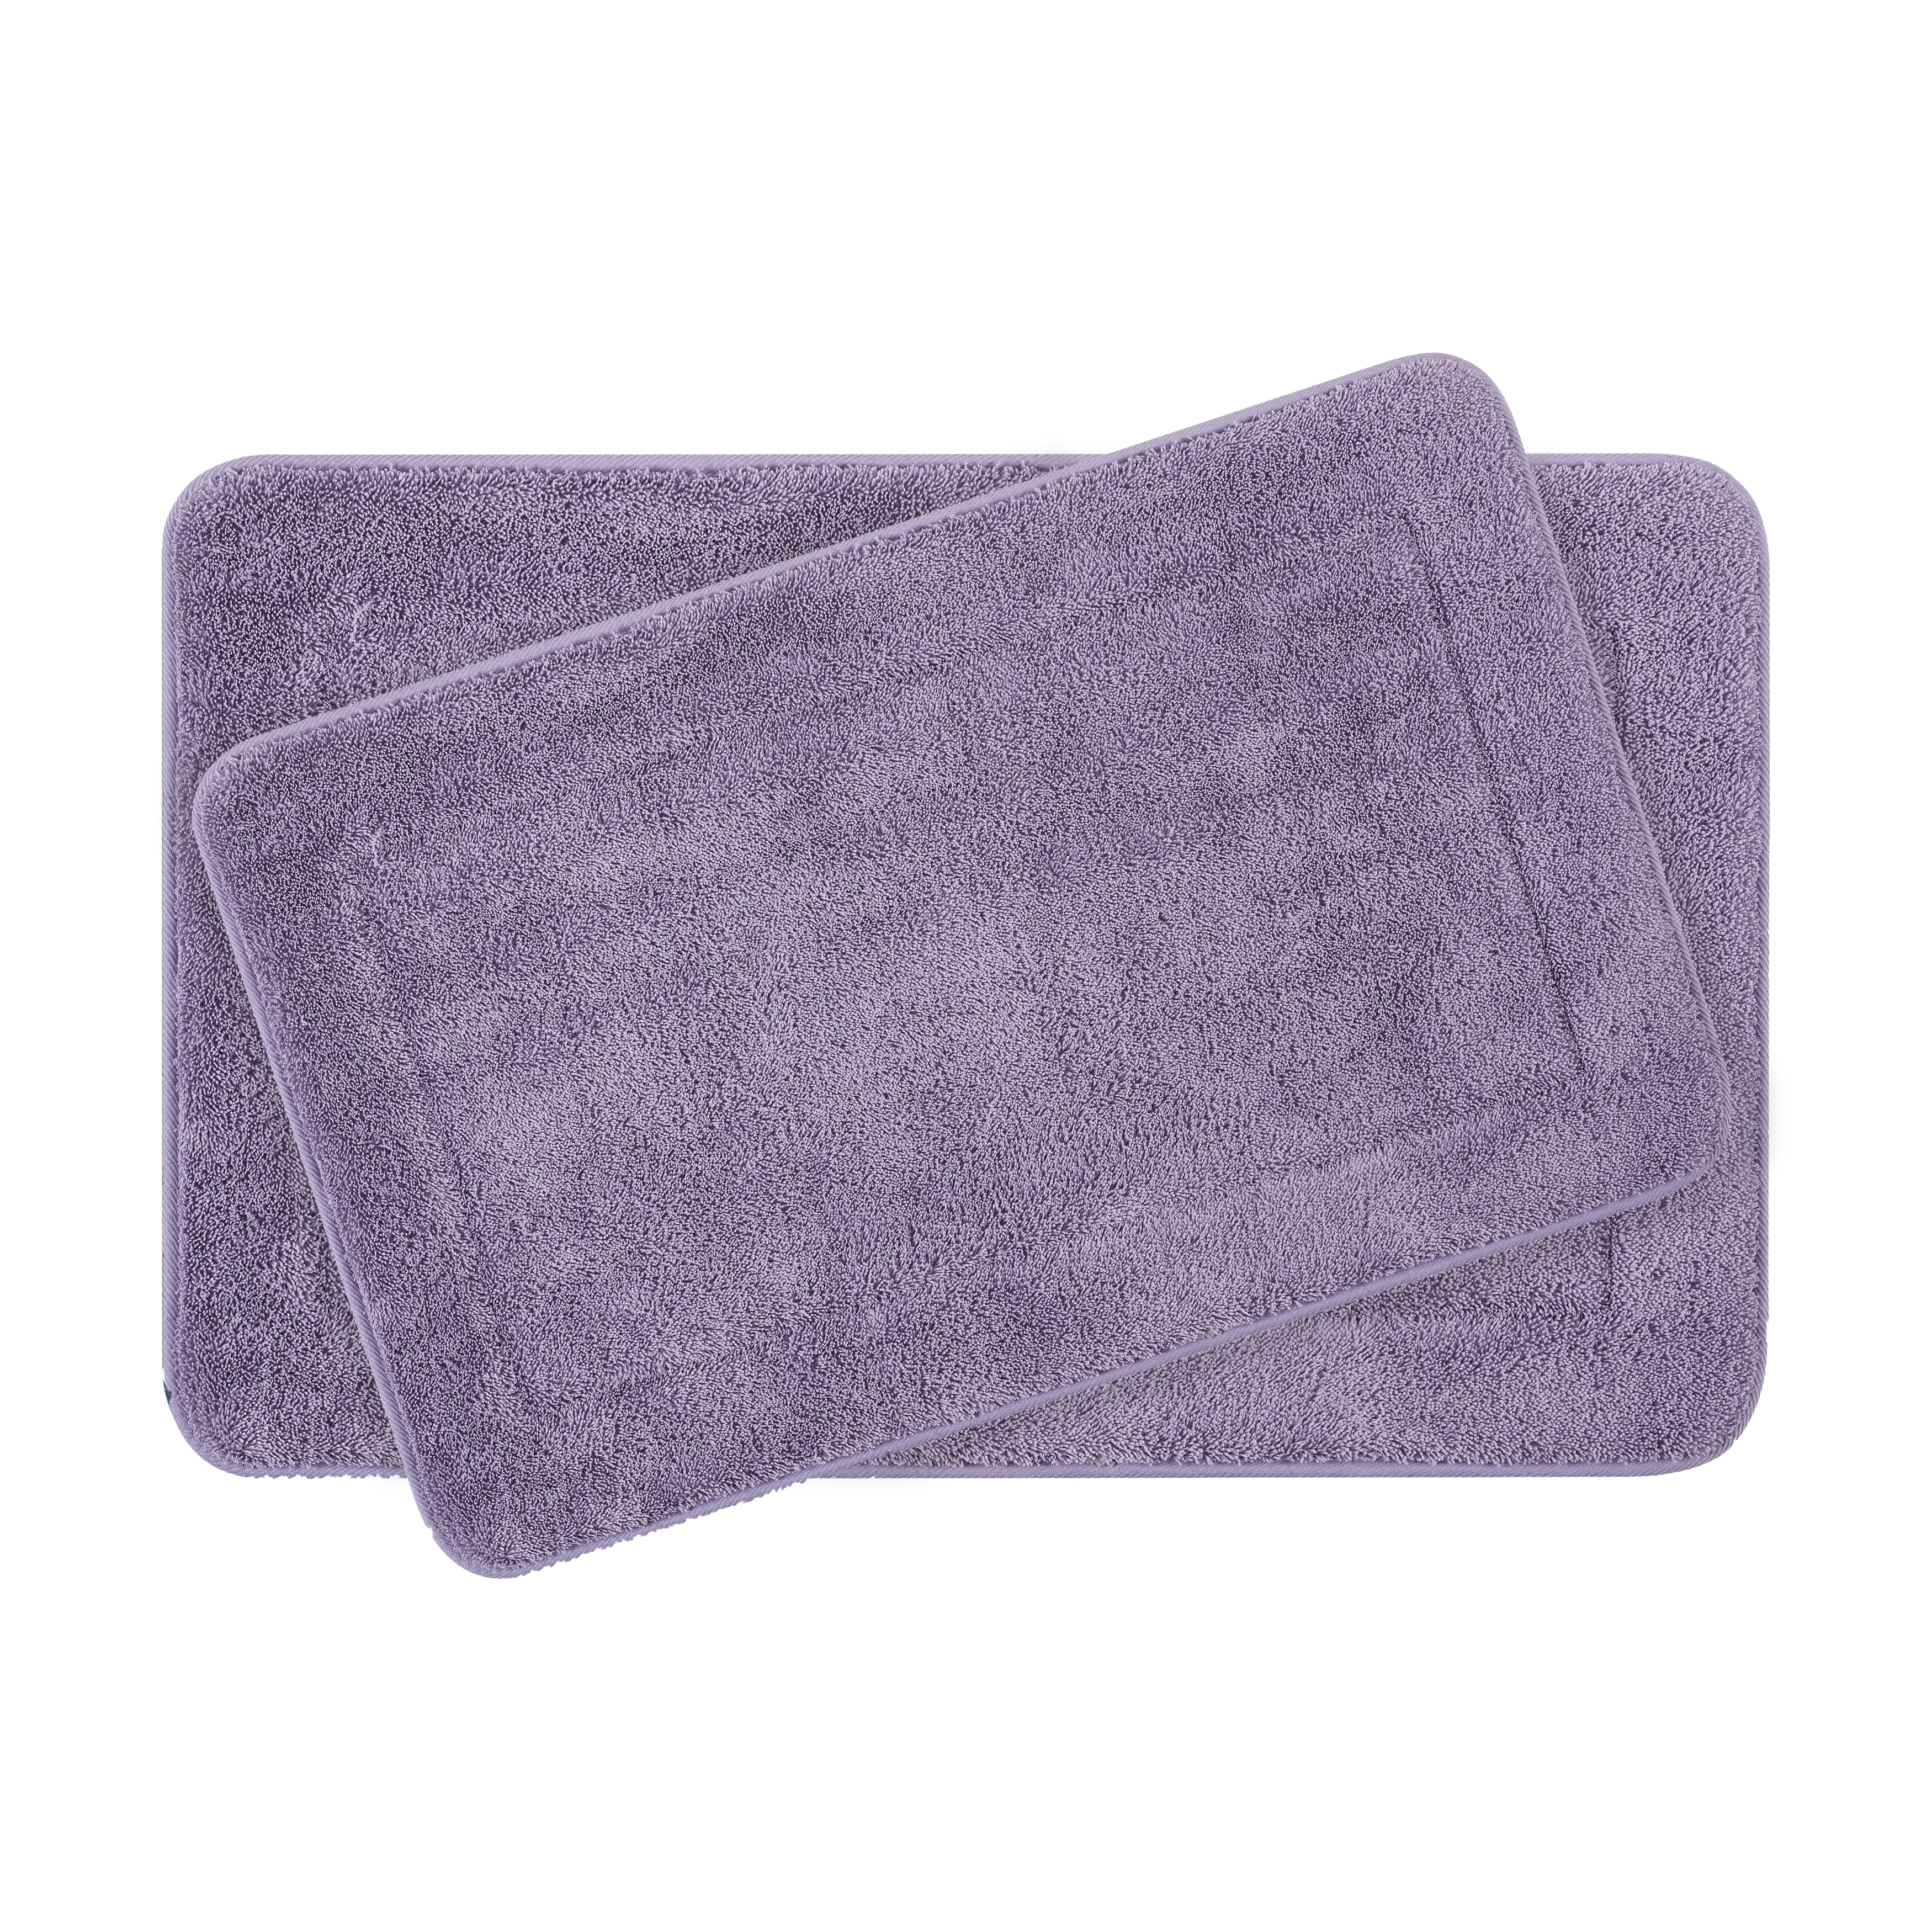 https://ak1.ostkcdn.com/images/products/is/images/direct/7130efd2dd55691e64104d2cf4bff069ae4e0fb9/Oliver-Brown-Terry-Memory-Foam-Bath-Mat.jpg